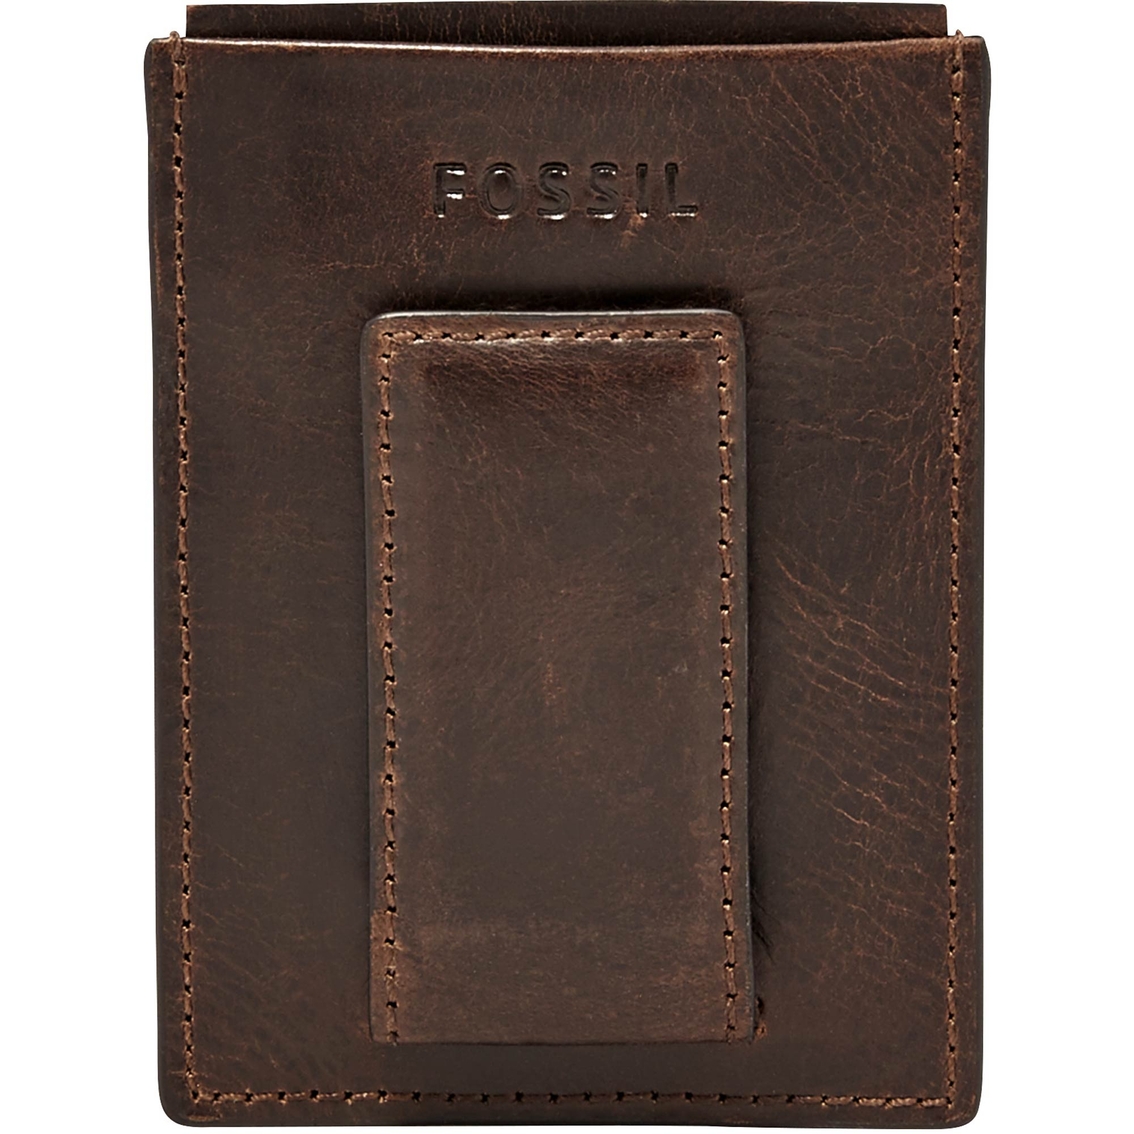 Fossil Derrick RFID Magnetic Card Case - Image 2 of 2